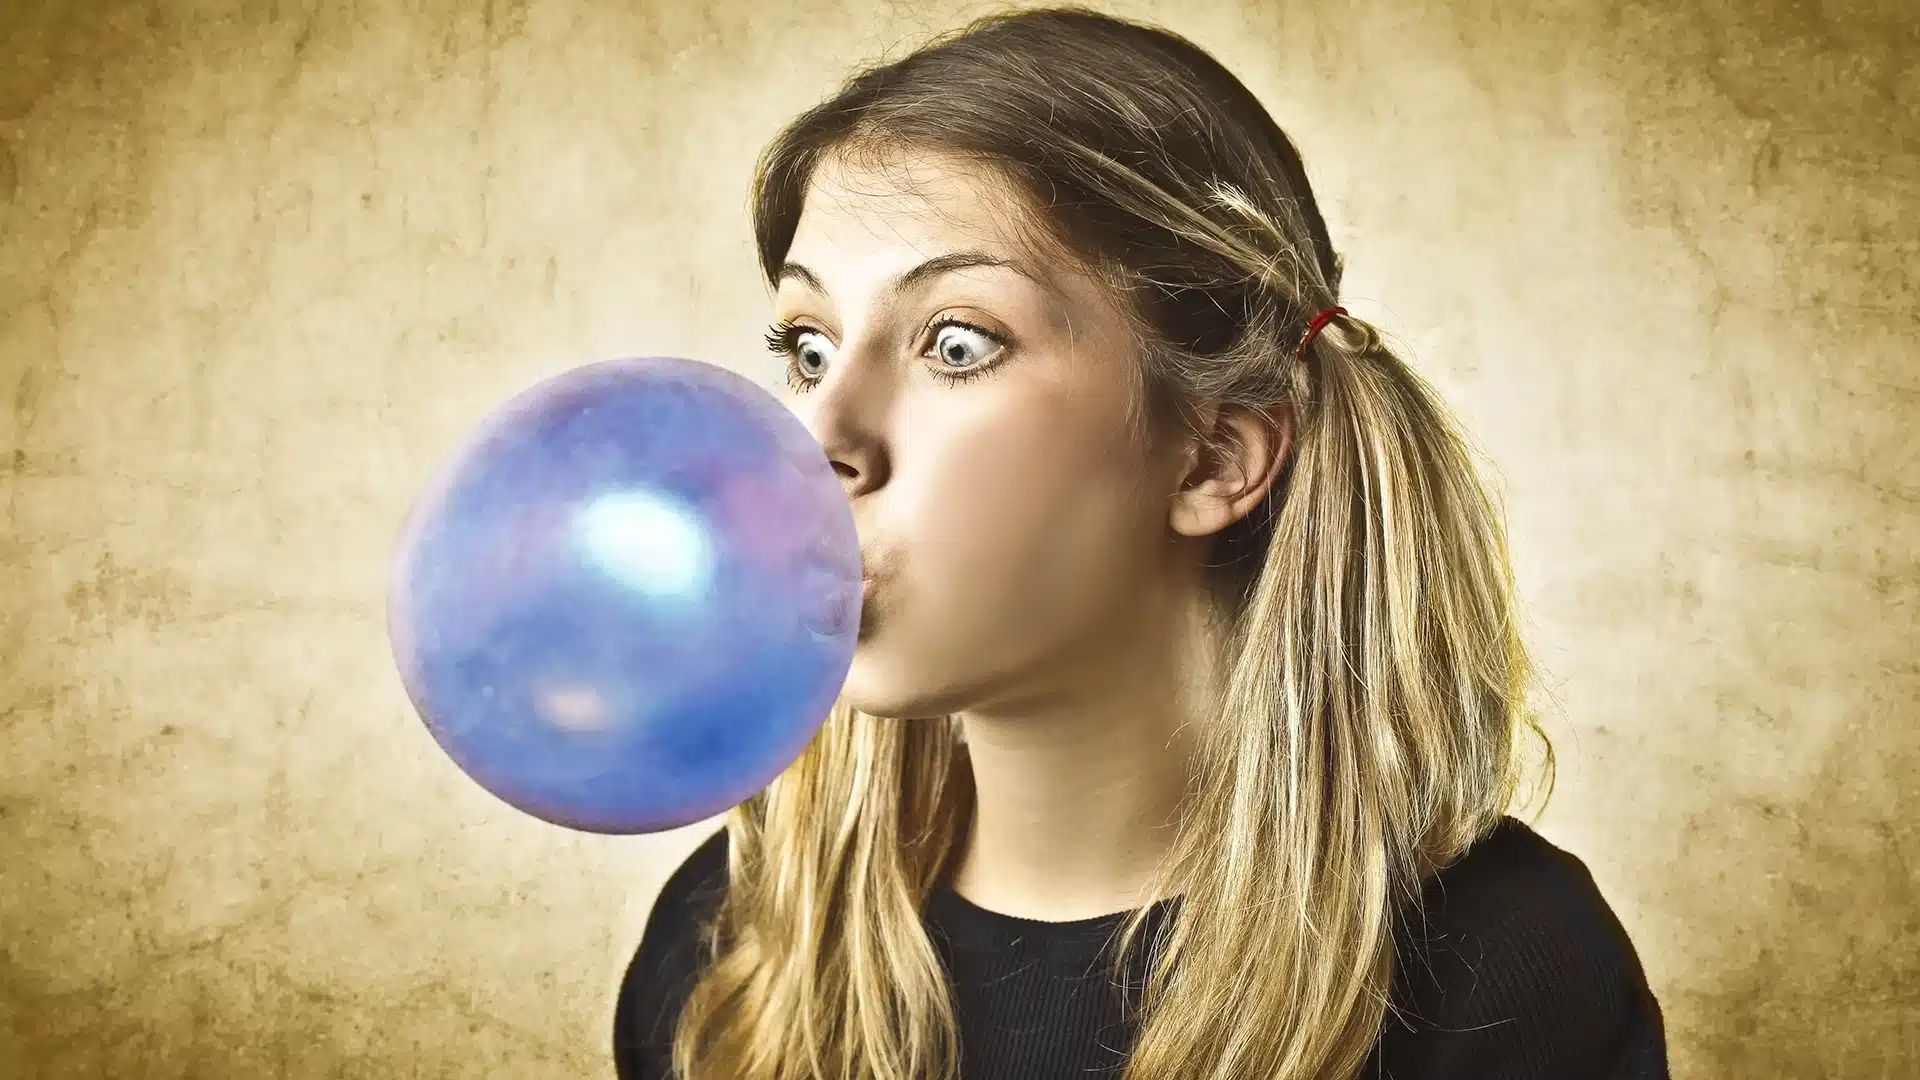 woman chewing bubble gum and blowing a bubble